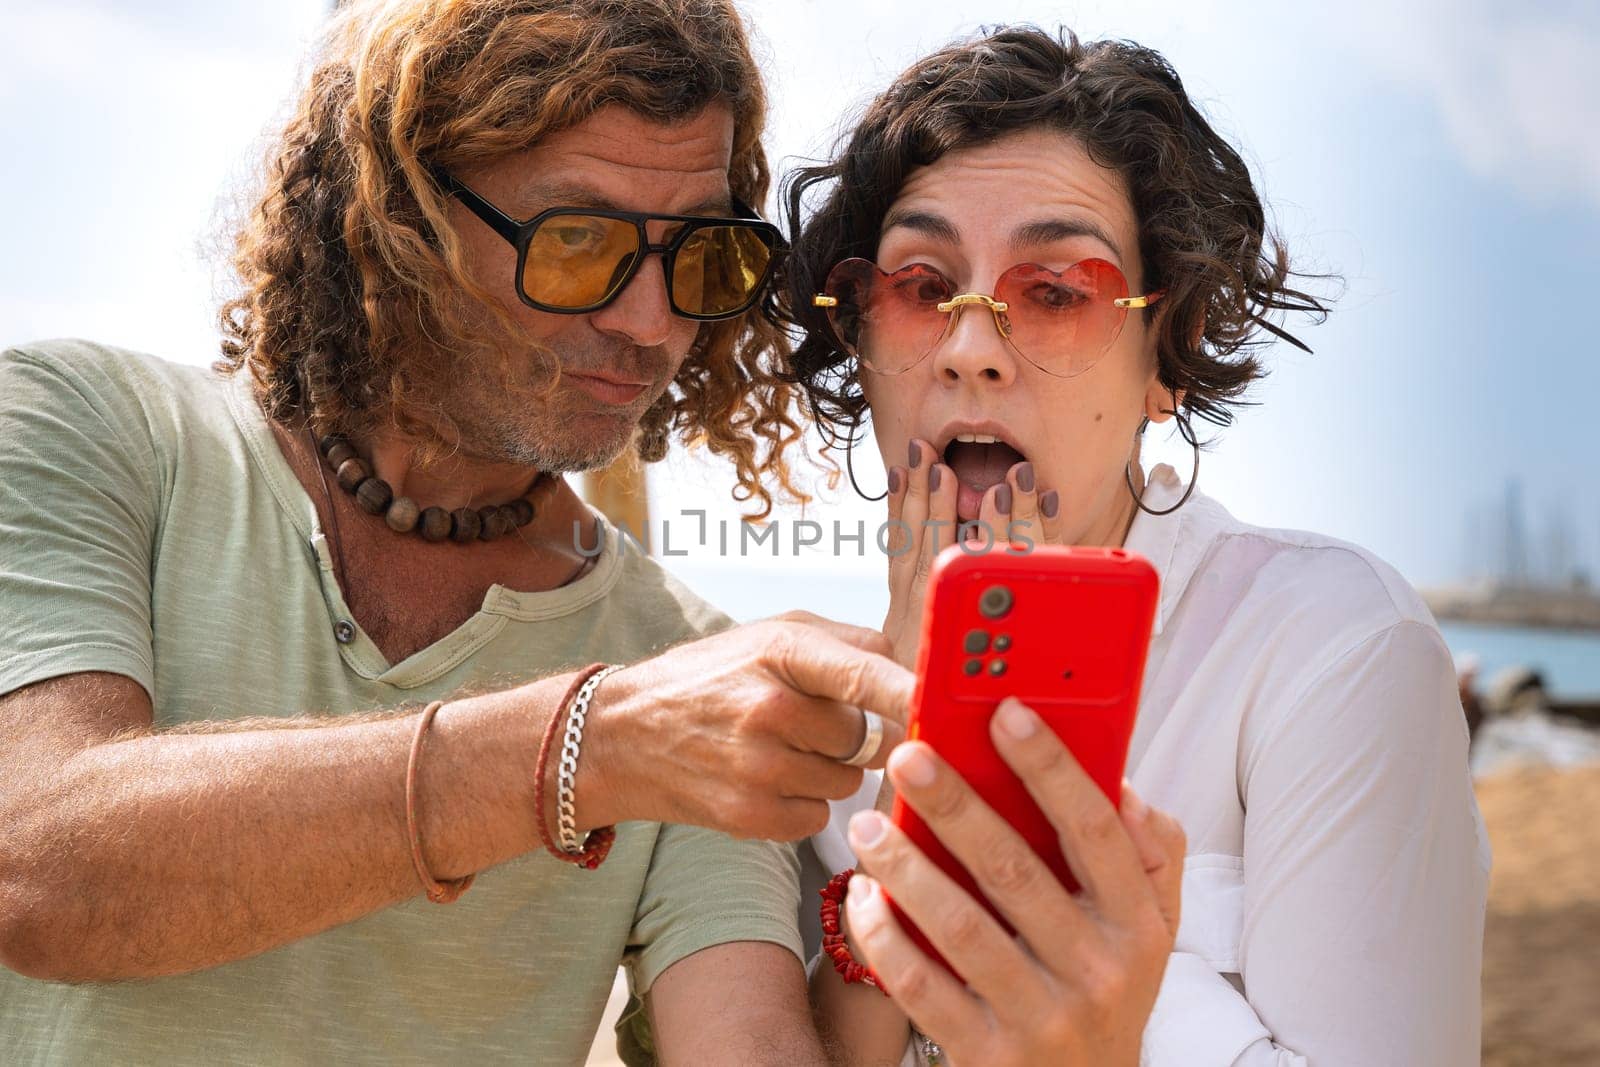 Middle-aged man and woman sitting on the beach with surprised face, browsing smartphone apps. Concept:Holidays y Technology